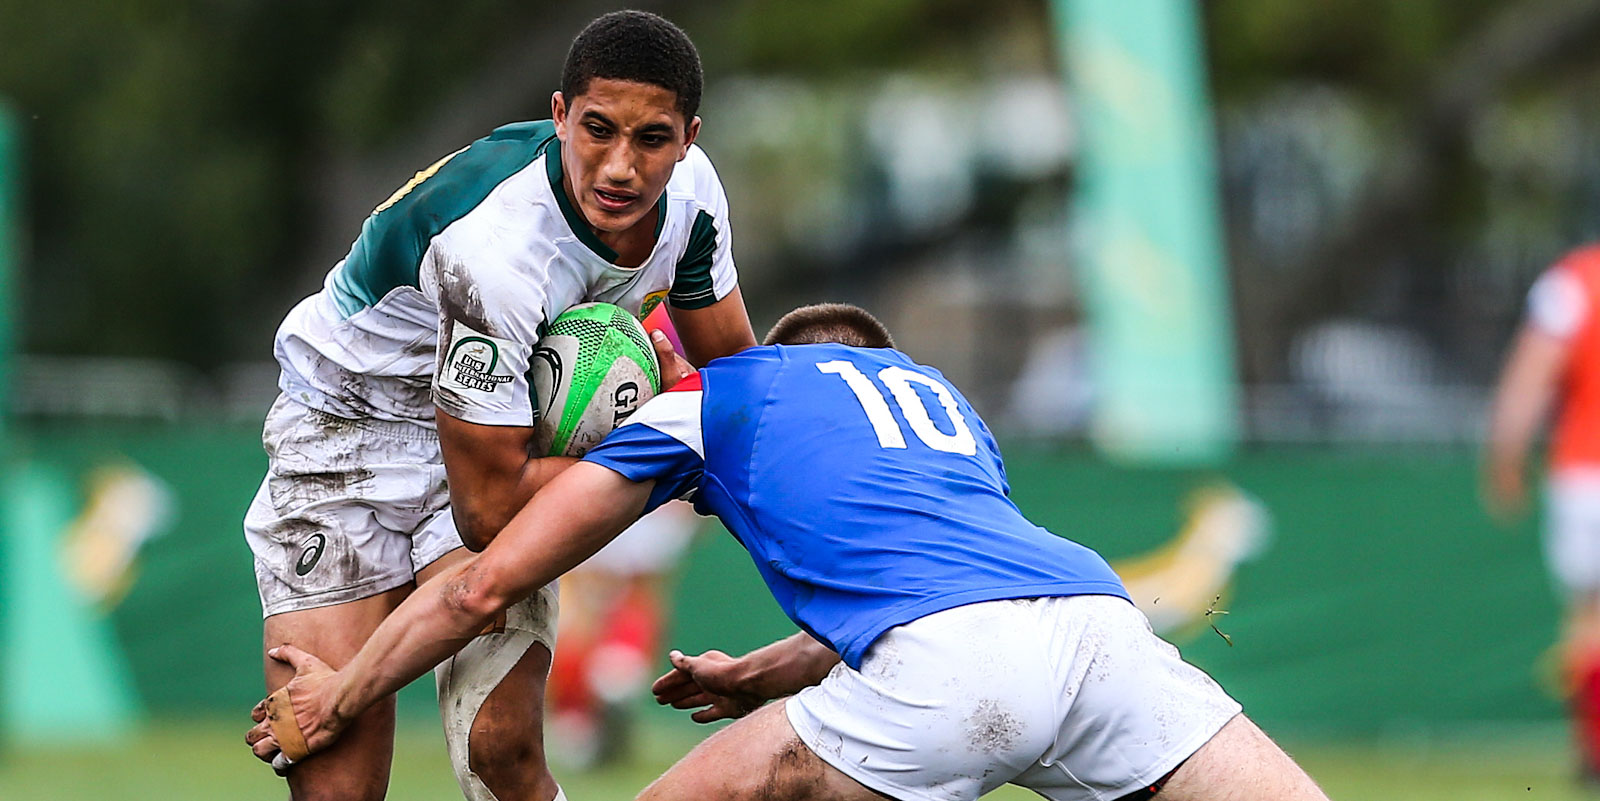 Taking on France for the SA Schools A side in the U18 International Series in 2019.